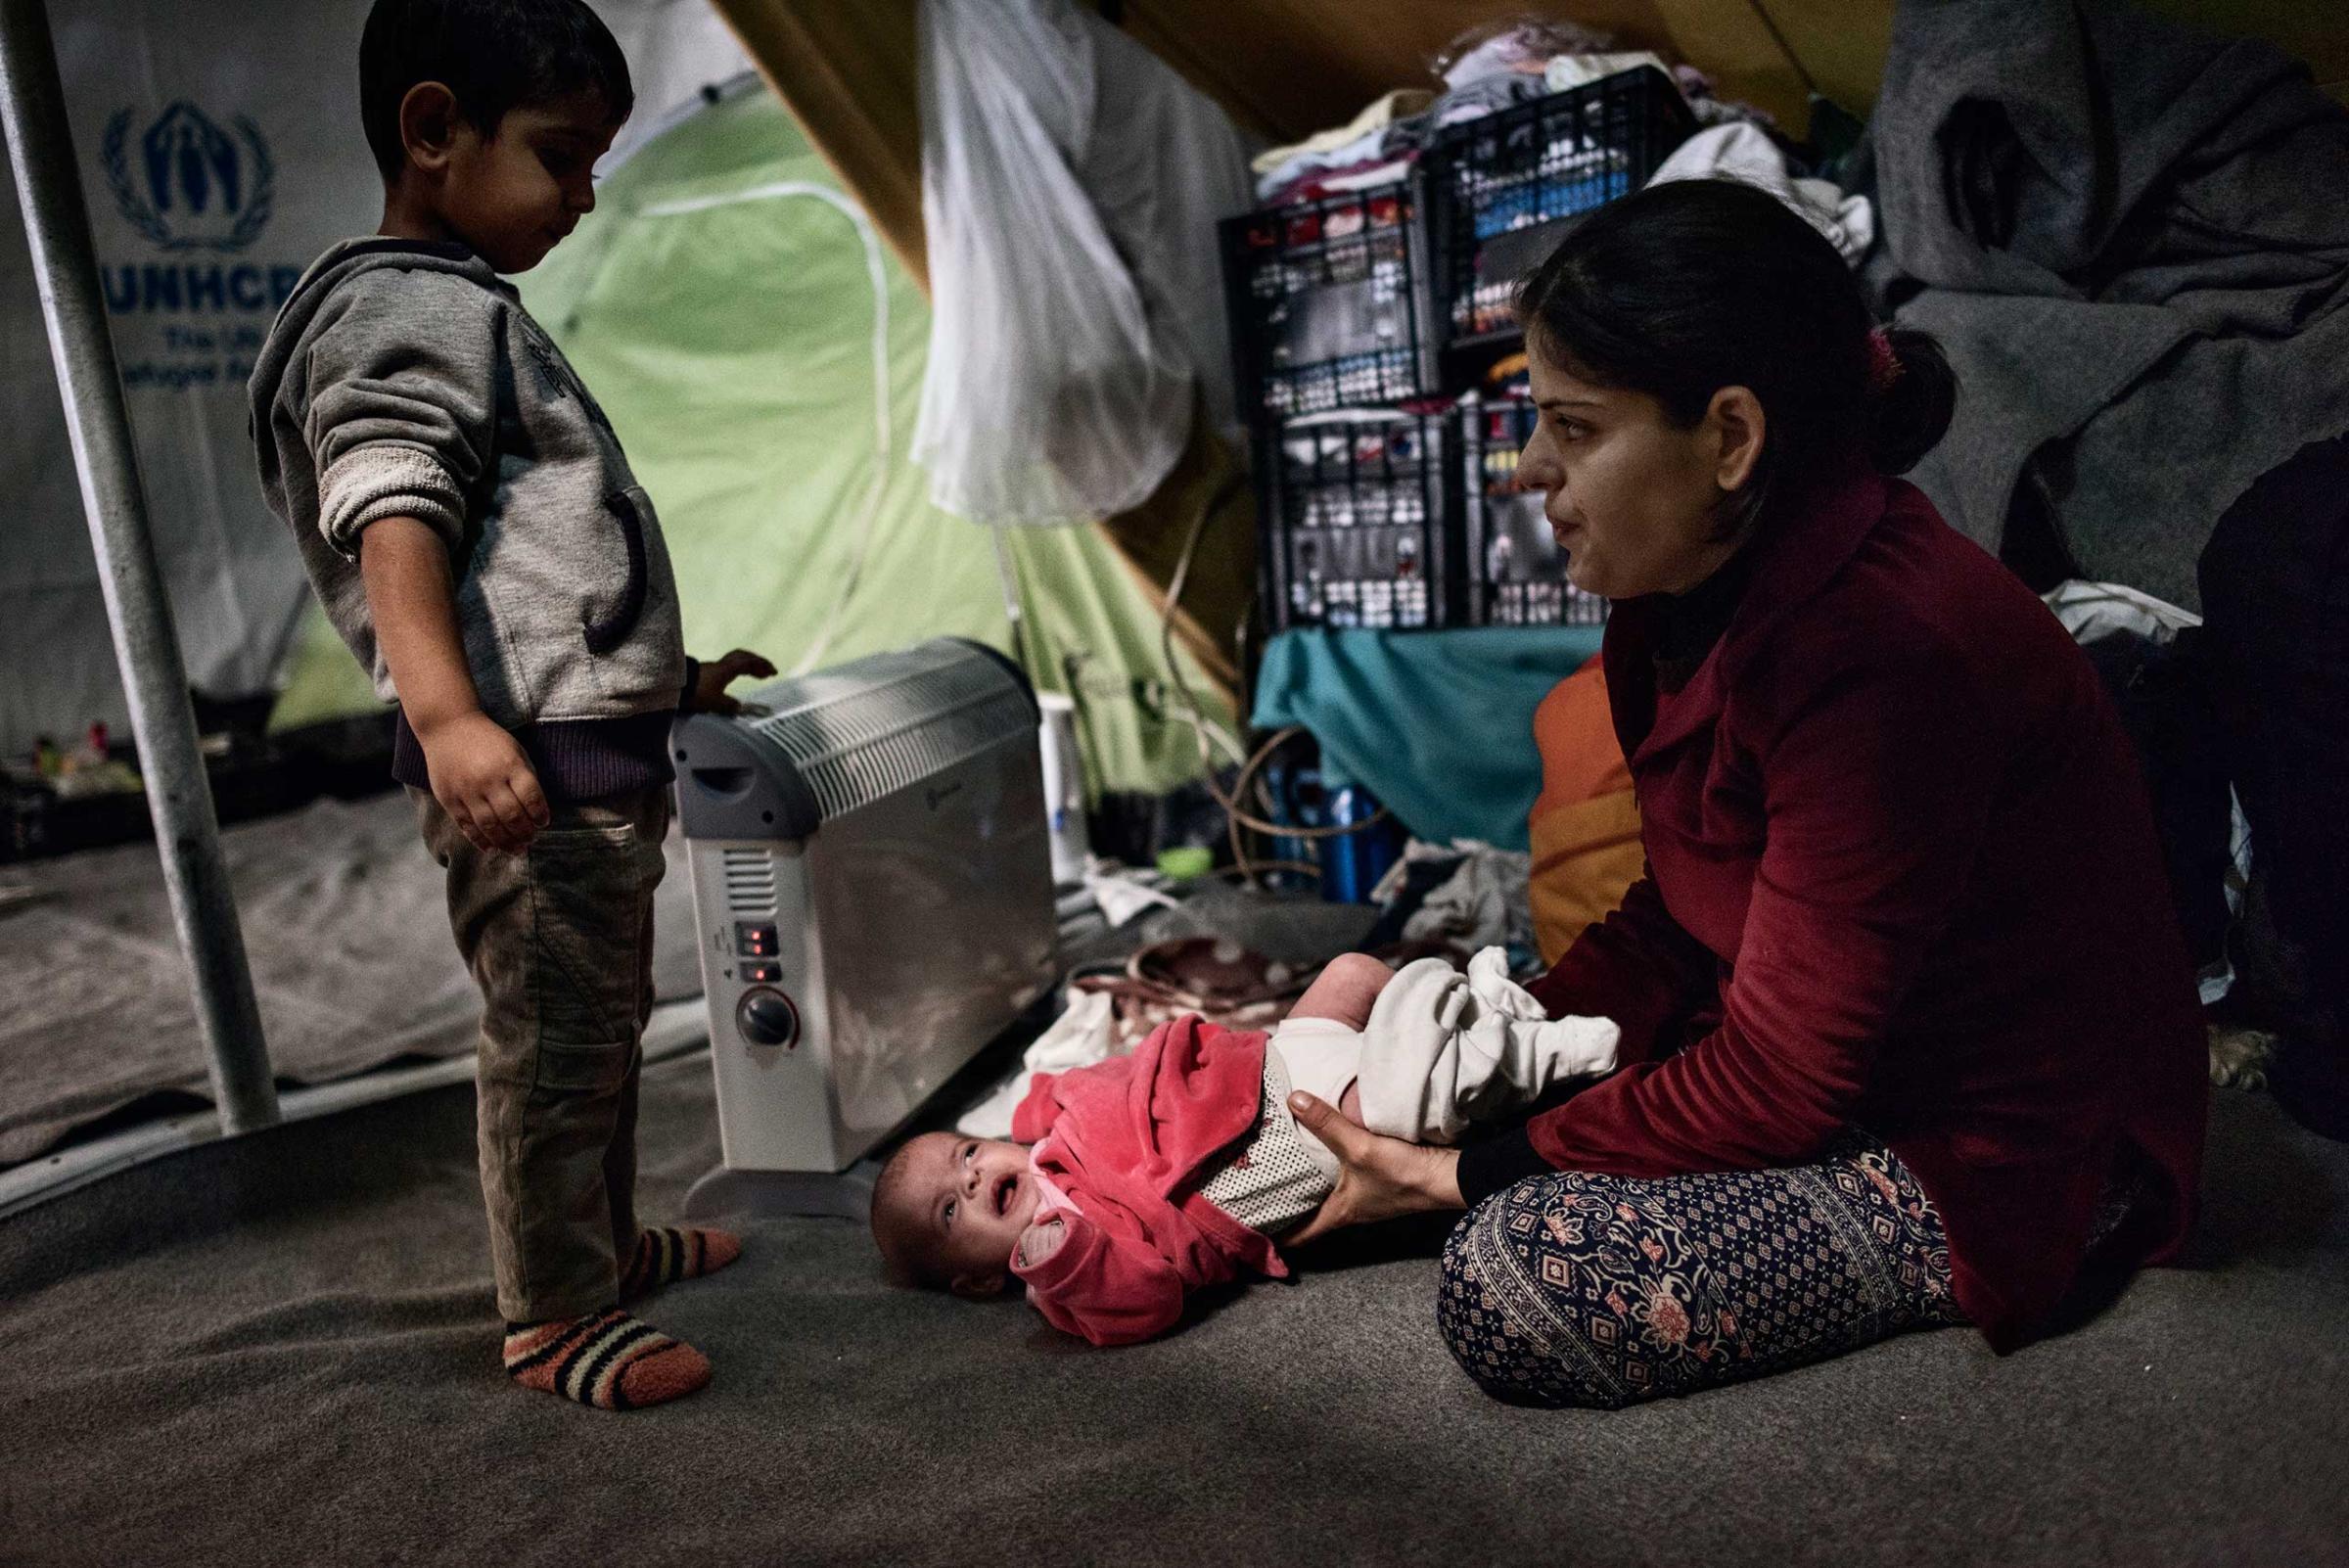 Dejla Alloush, 25, with her son and infant born on Oct. 6, 2016 at a camp in Thessaloniki, Greece. She and her husband Mohammad, 40, are from Aleppo. Dejla is Mohammad's second wife. Because his first wife, Khelat, couldn't have children, he married Dejla. Dejla worries she will be separated from her four children by Europeans who do not understand polygamous marriages, Nov. 11, 2016.